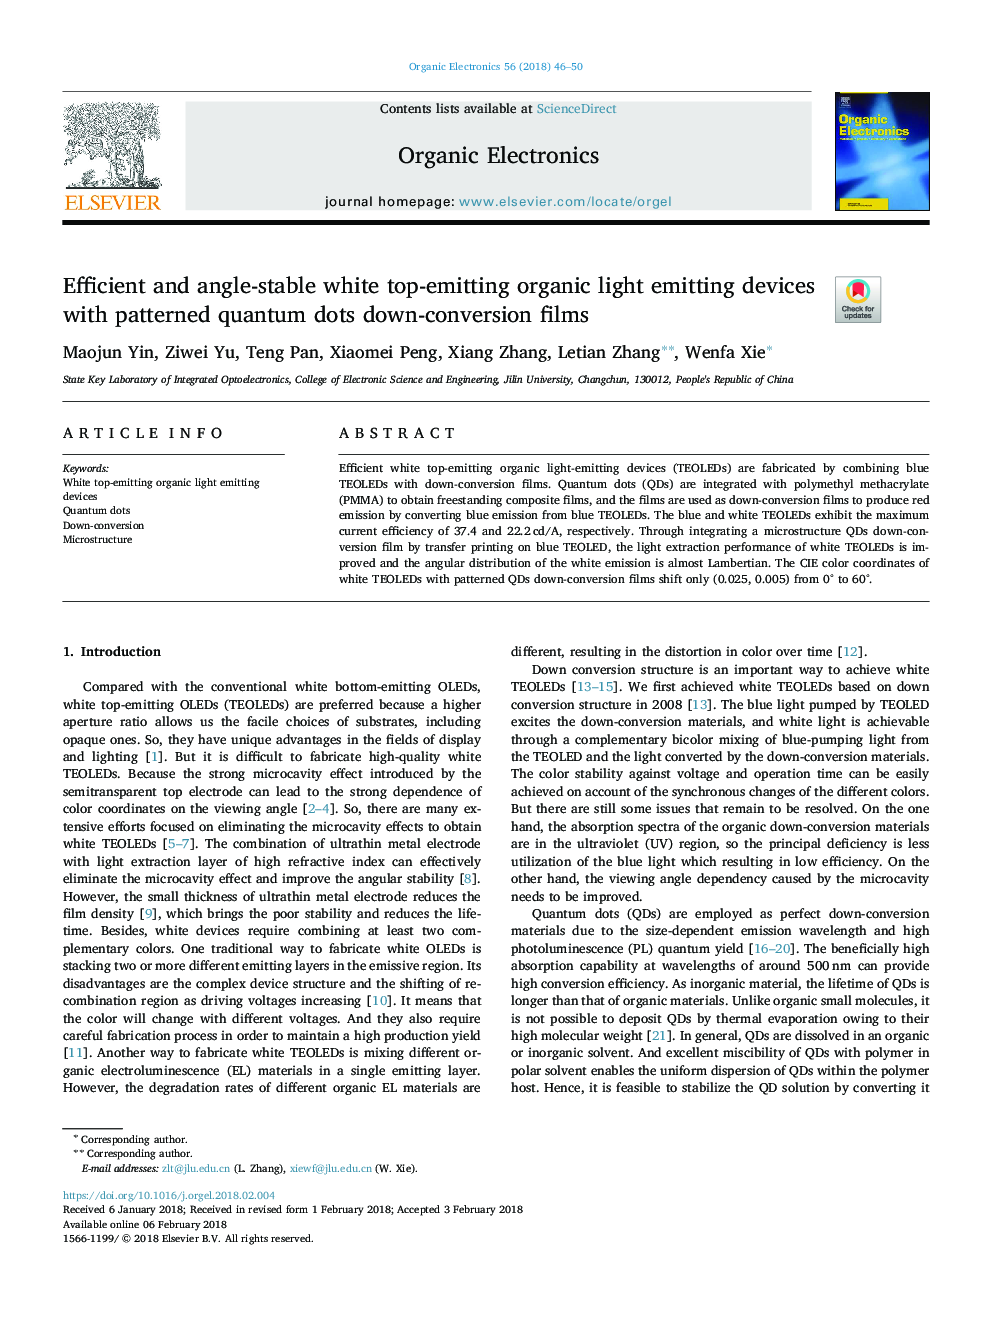 Efficient and angle-stable white top-emitting organic light emitting devices with patterned quantum dots down-conversion films